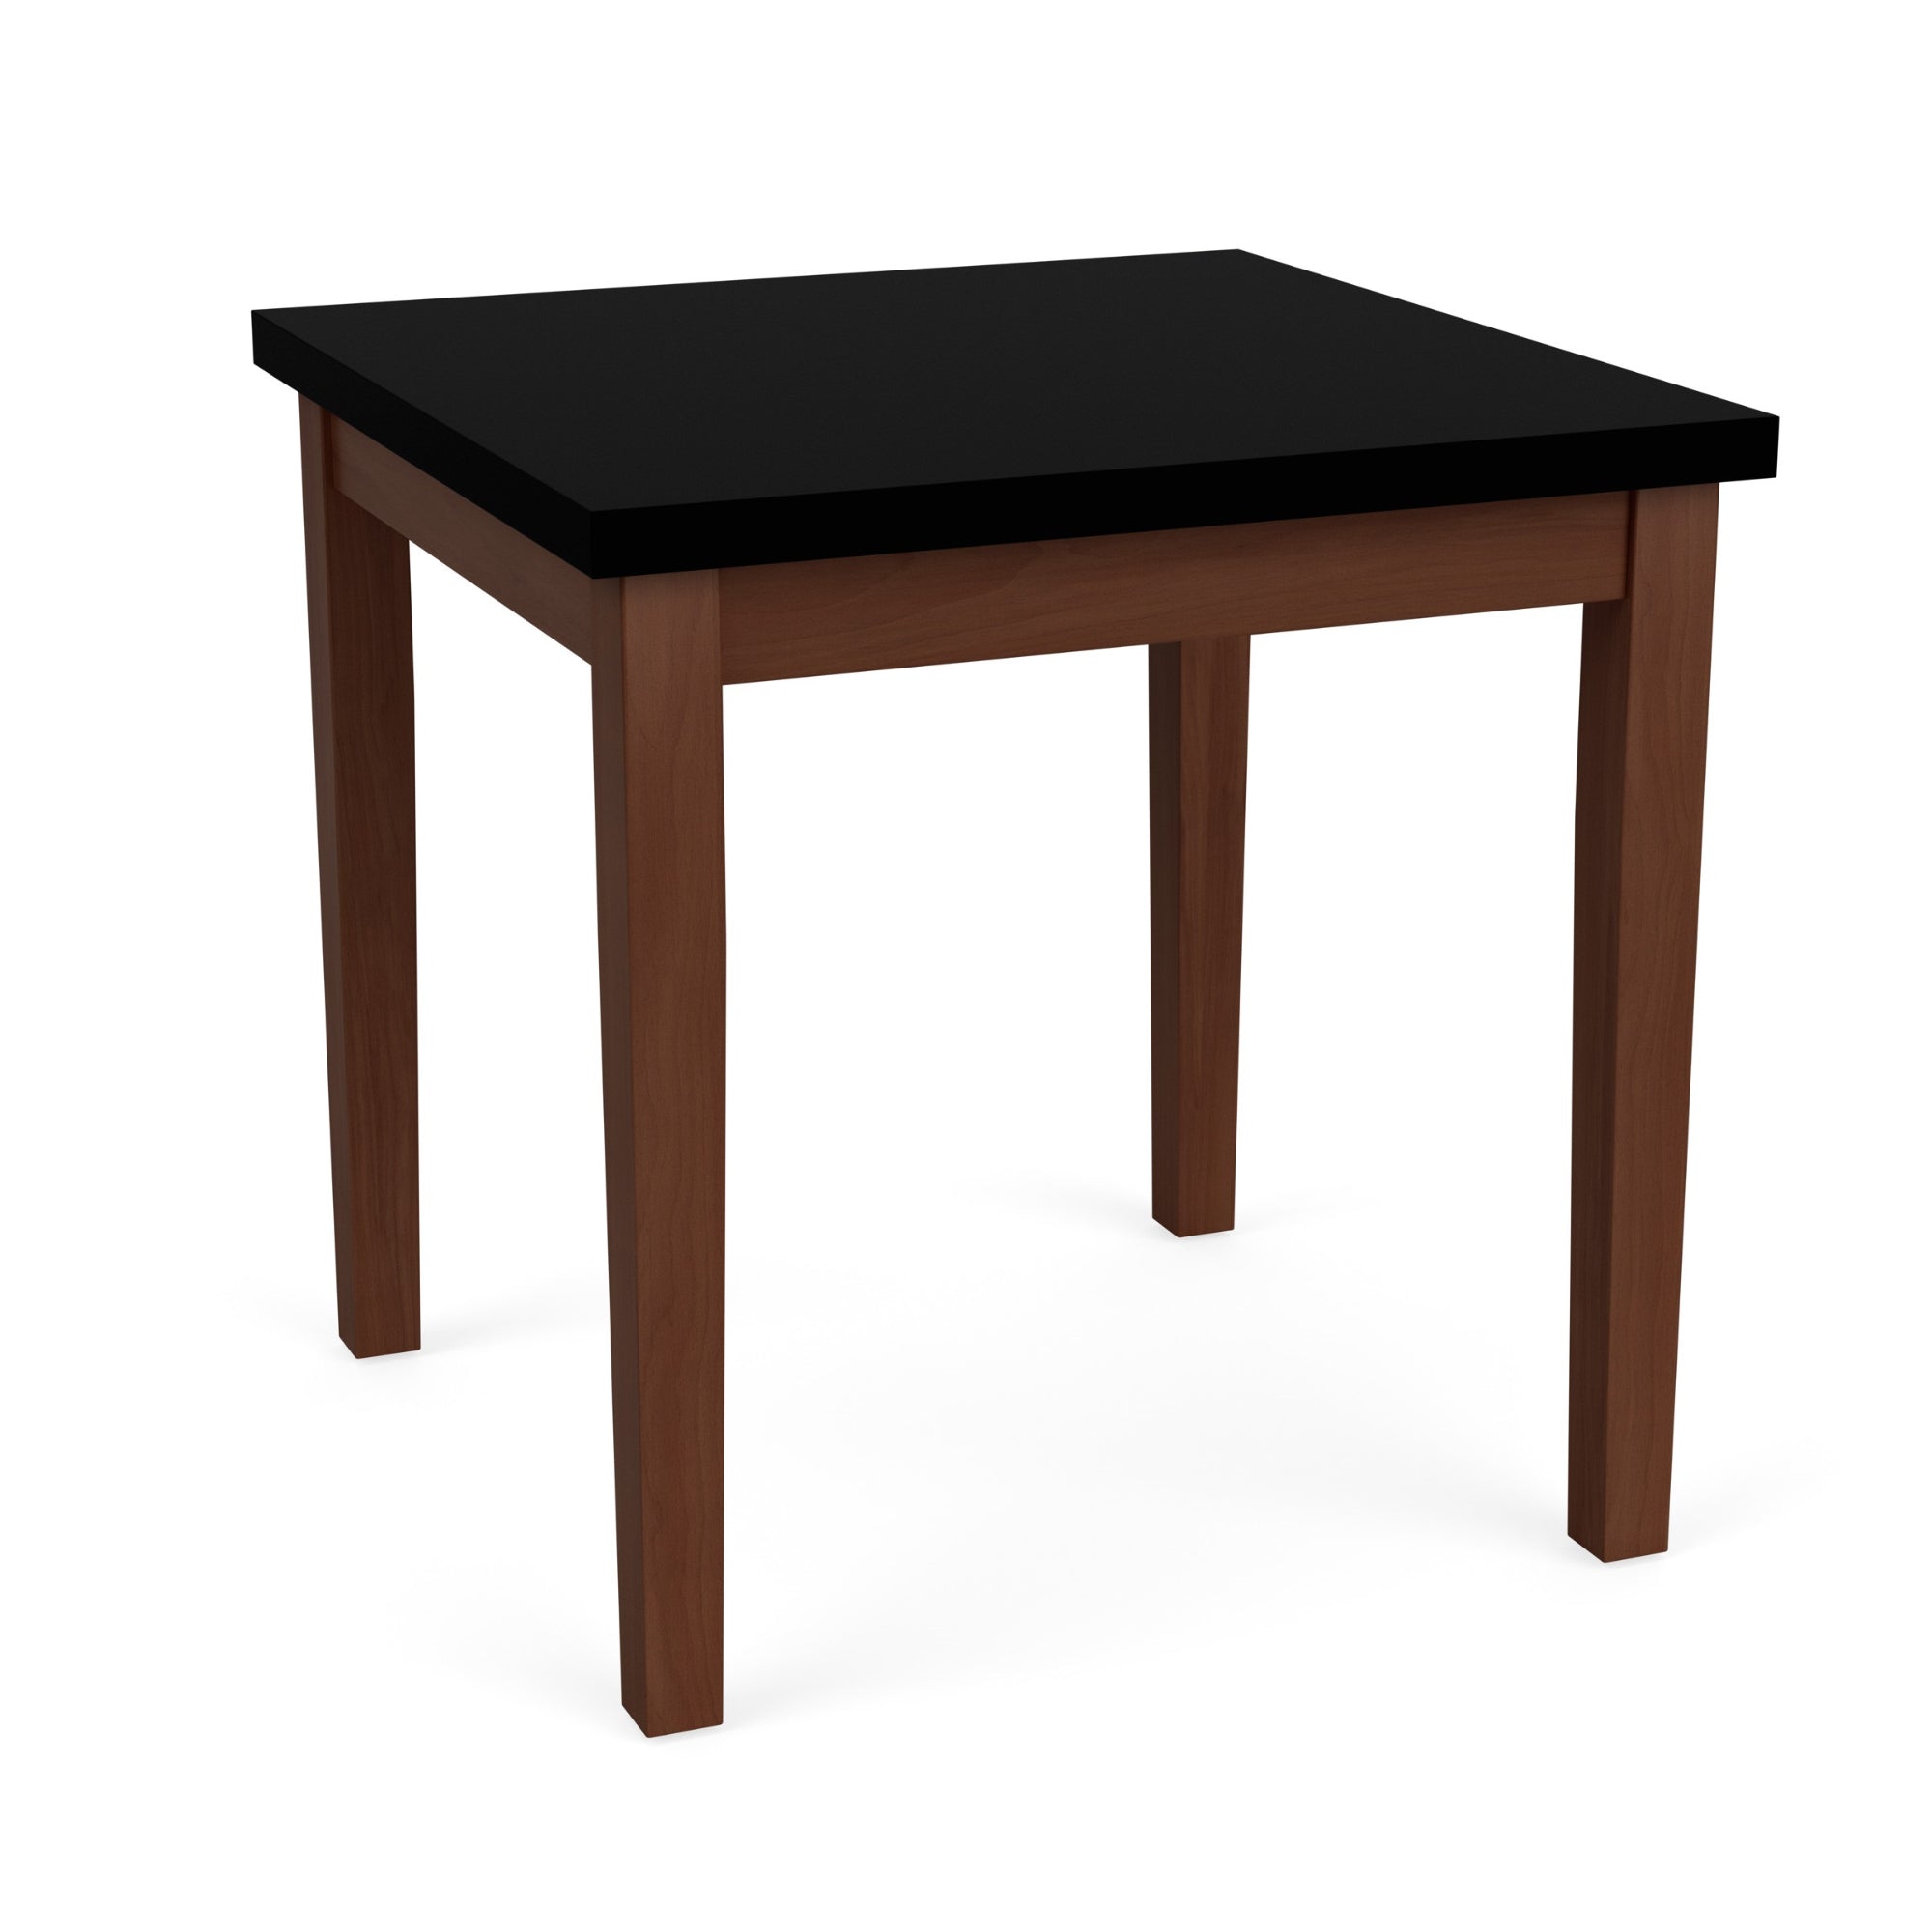 Lenox Wood Collection End Table, Black Laminate Tabletop, FREE SHIPPING